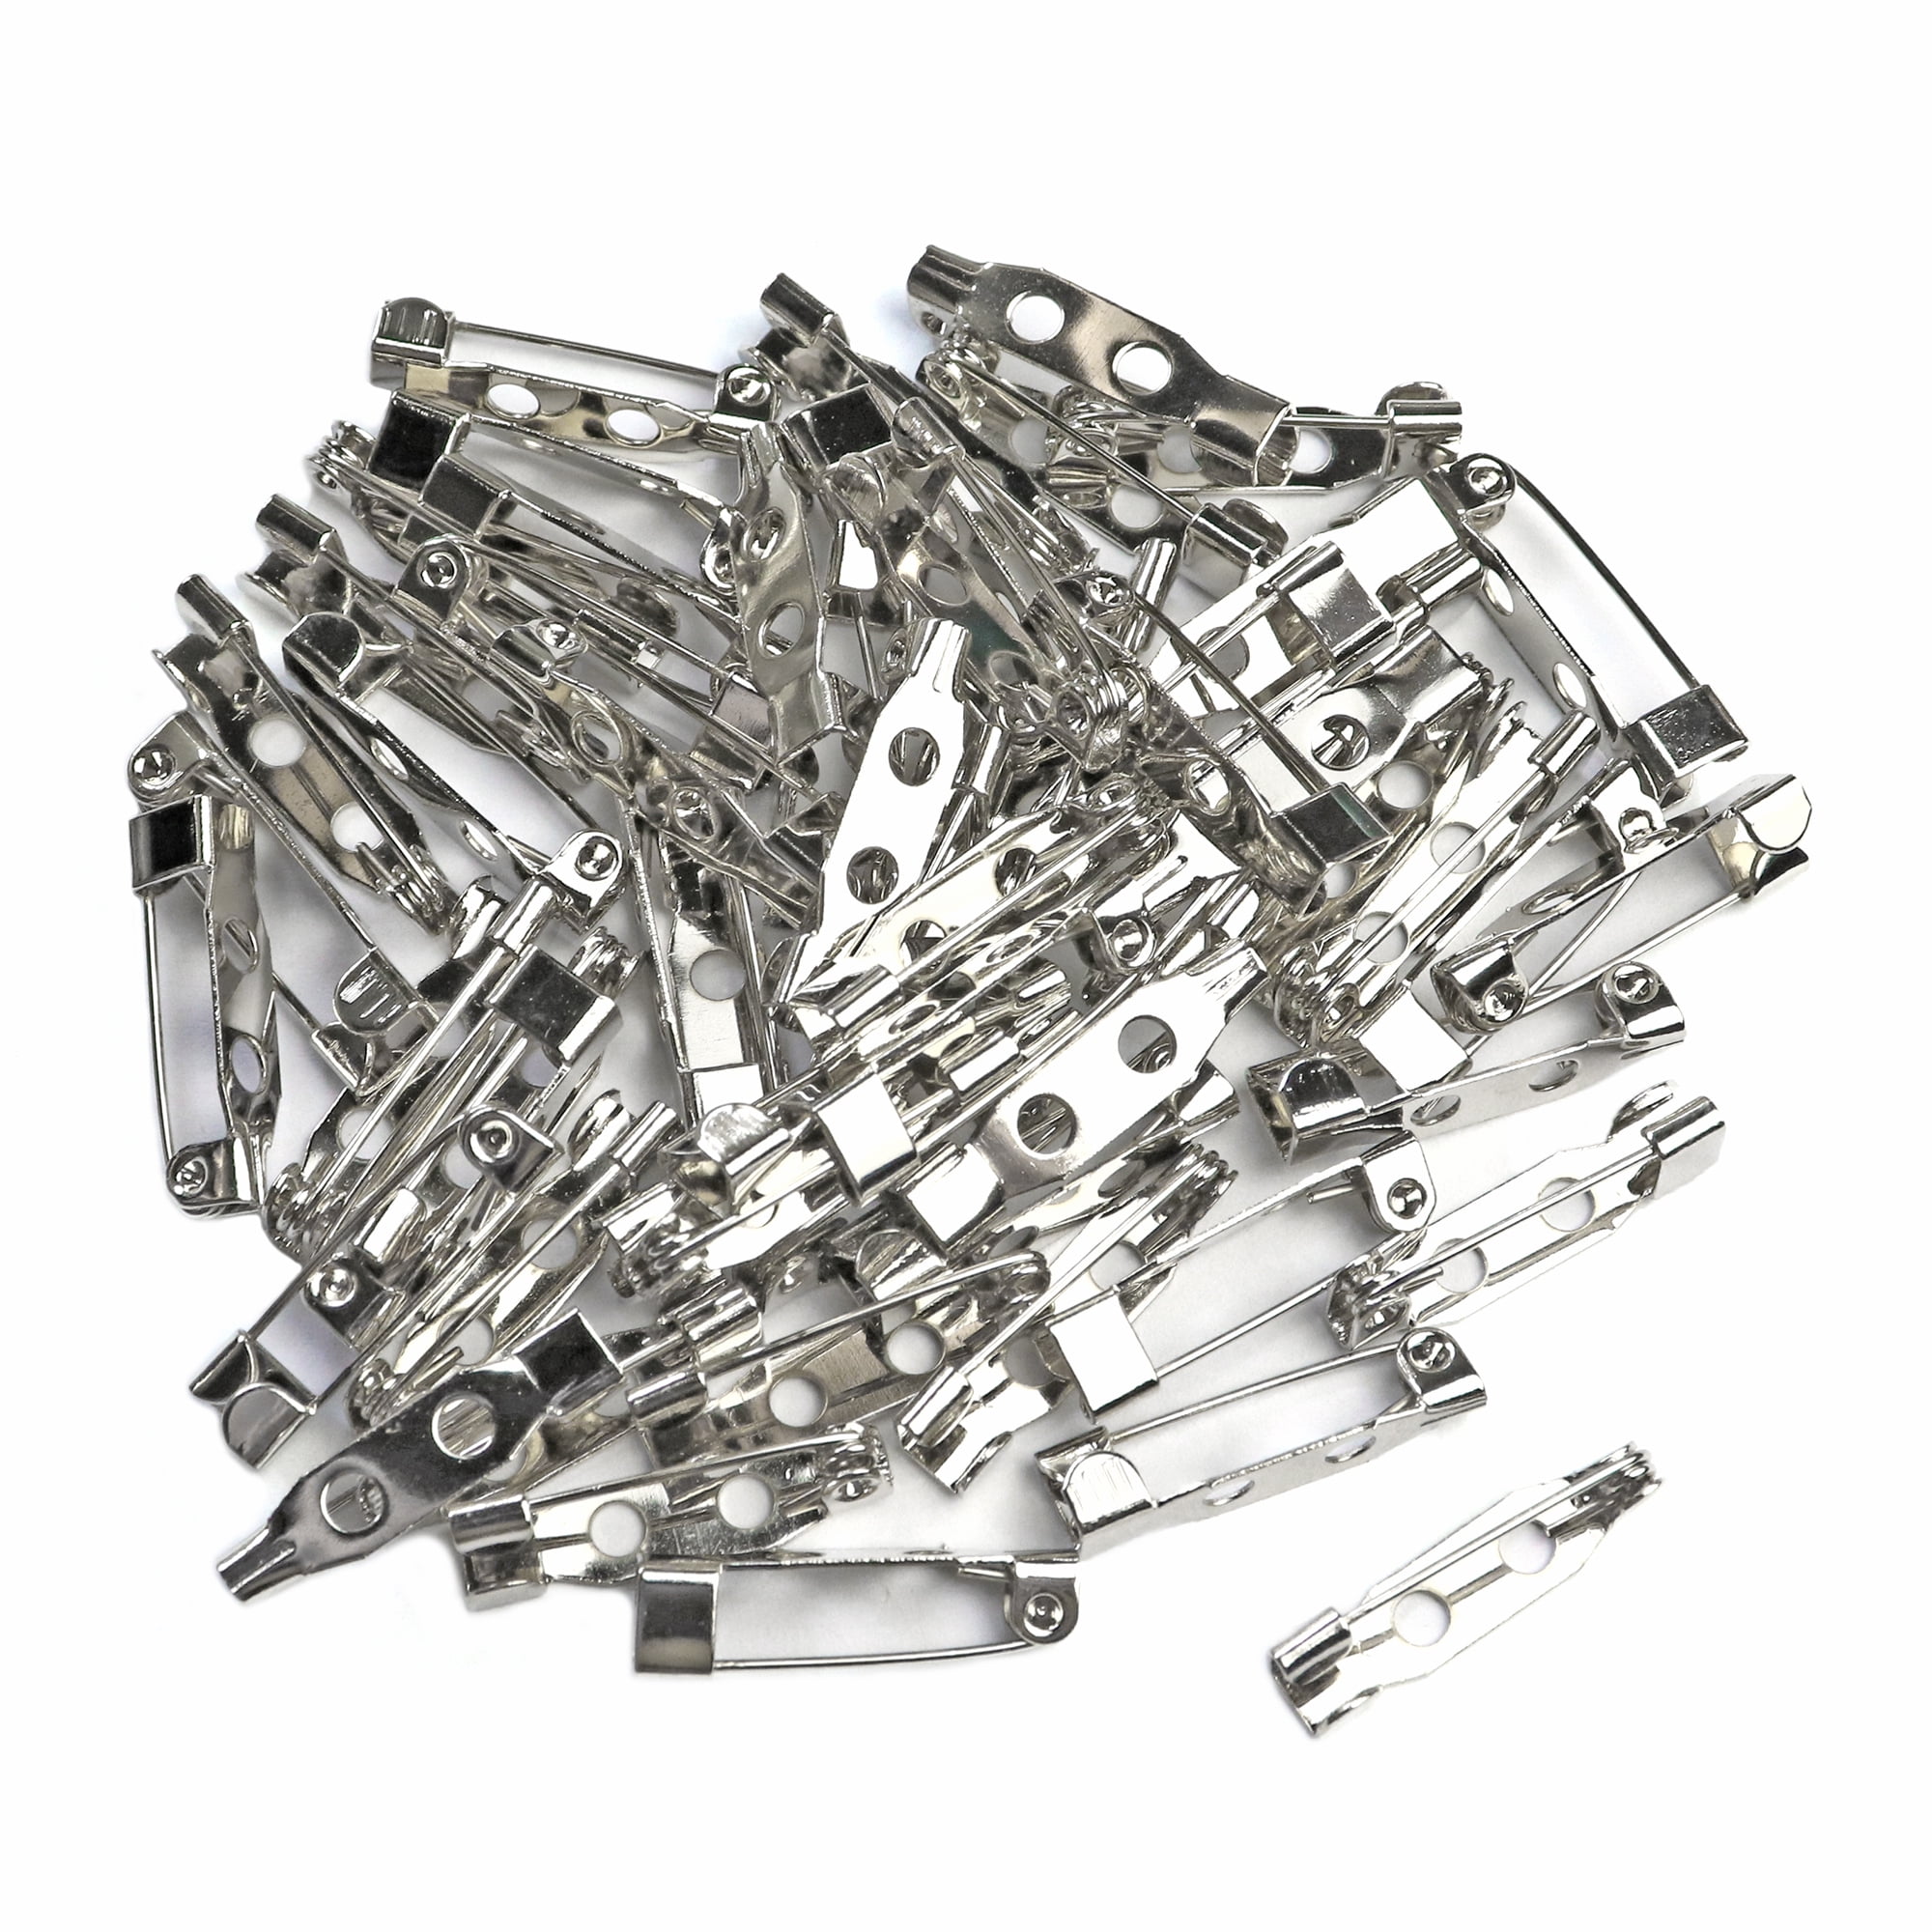 200 Pcs Silver Safety Pins 1.5 Inch (38mm) Pins Findings Backs Pin Back  Clasp Brooch Bar Safety Pin with 3 Holes Safety Locking for Making Corsage